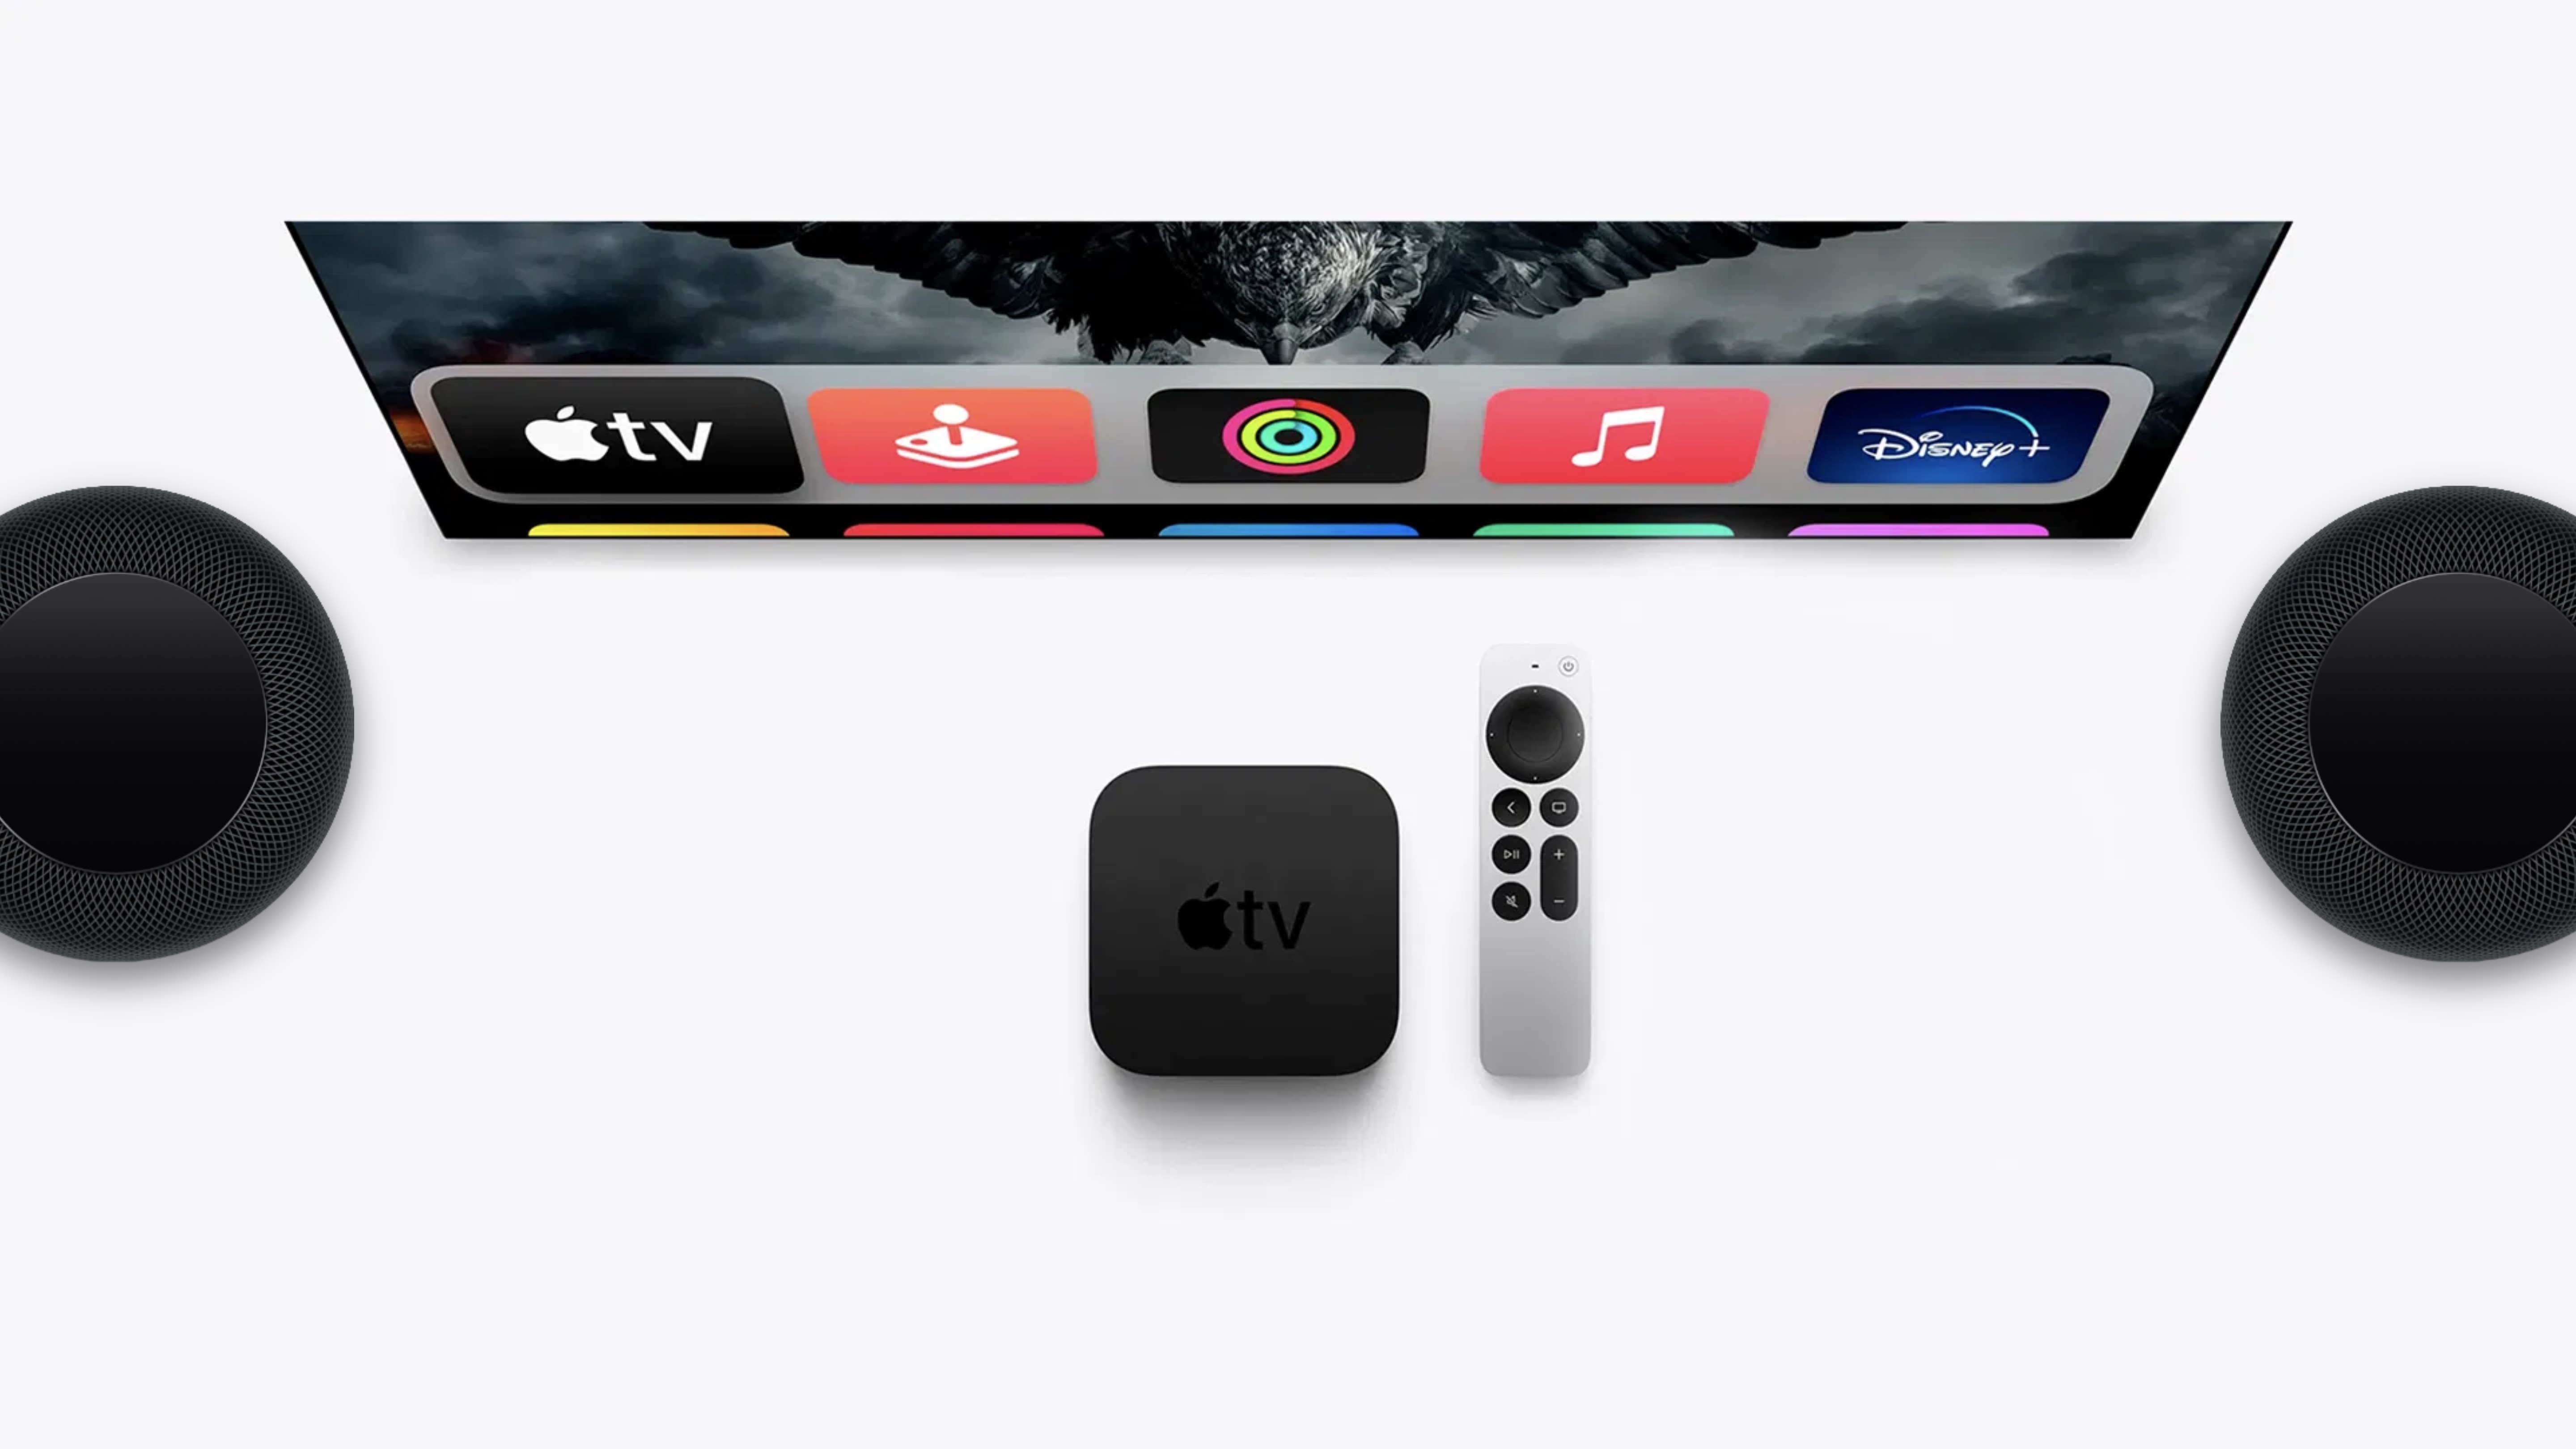 Feature Request: Apple TV and HomePod need better integration - 9to5Mac